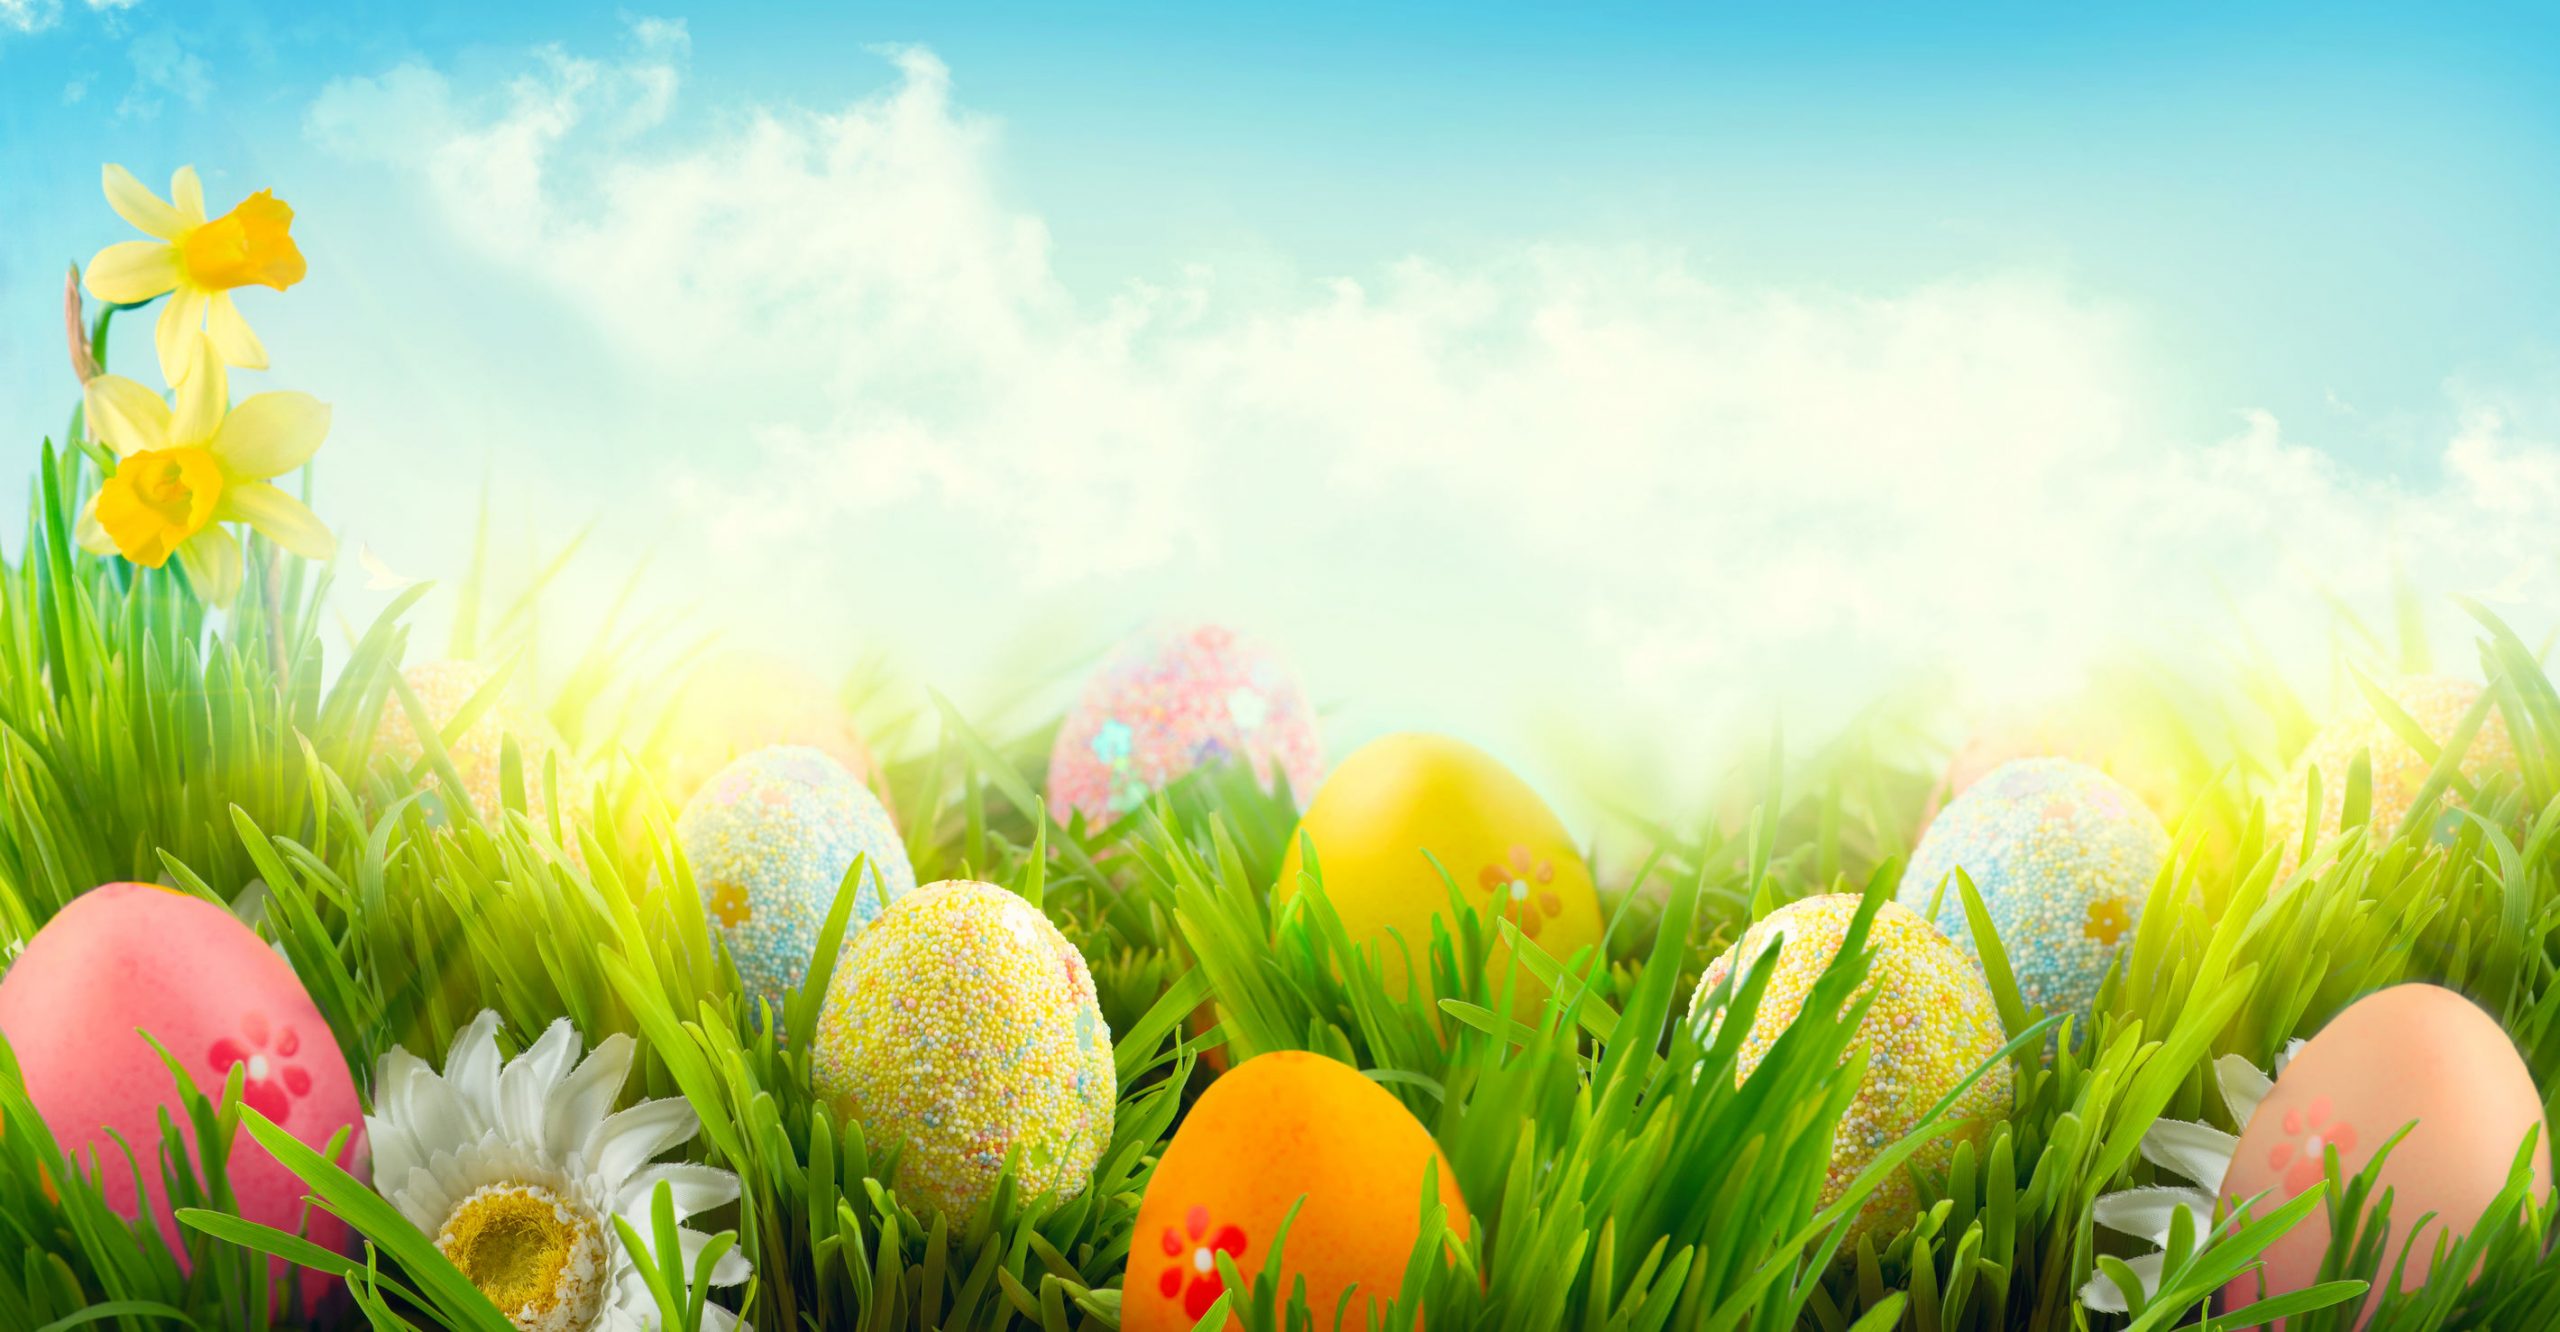 678 Free Easter Clipart and Images To Prepare for the Holiday